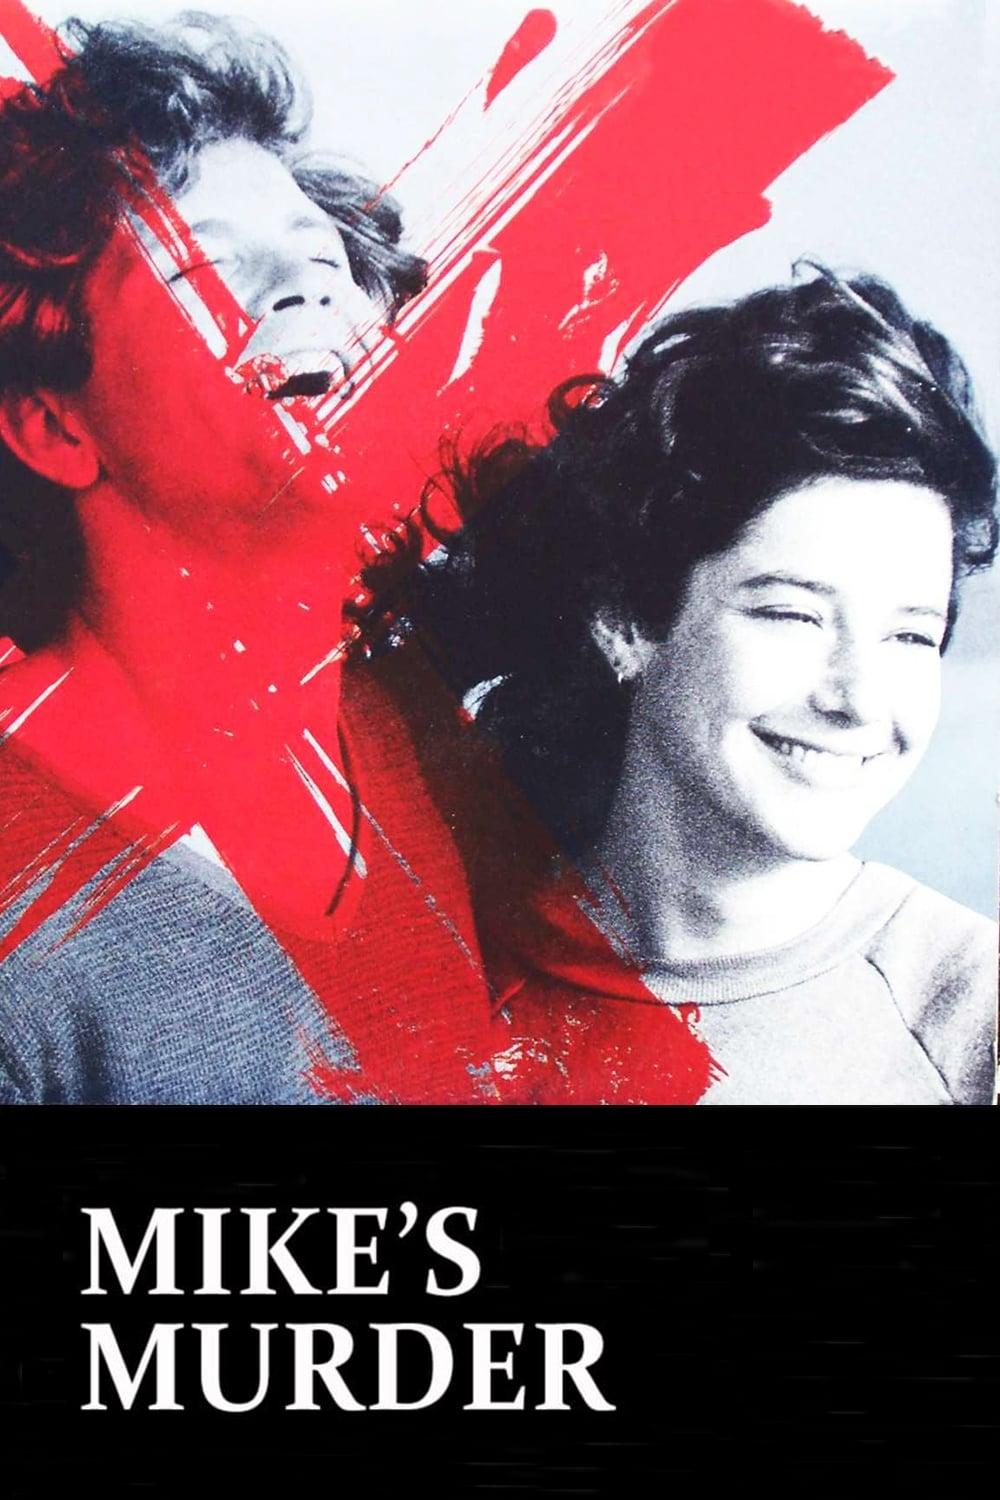 Mike's Murder poster